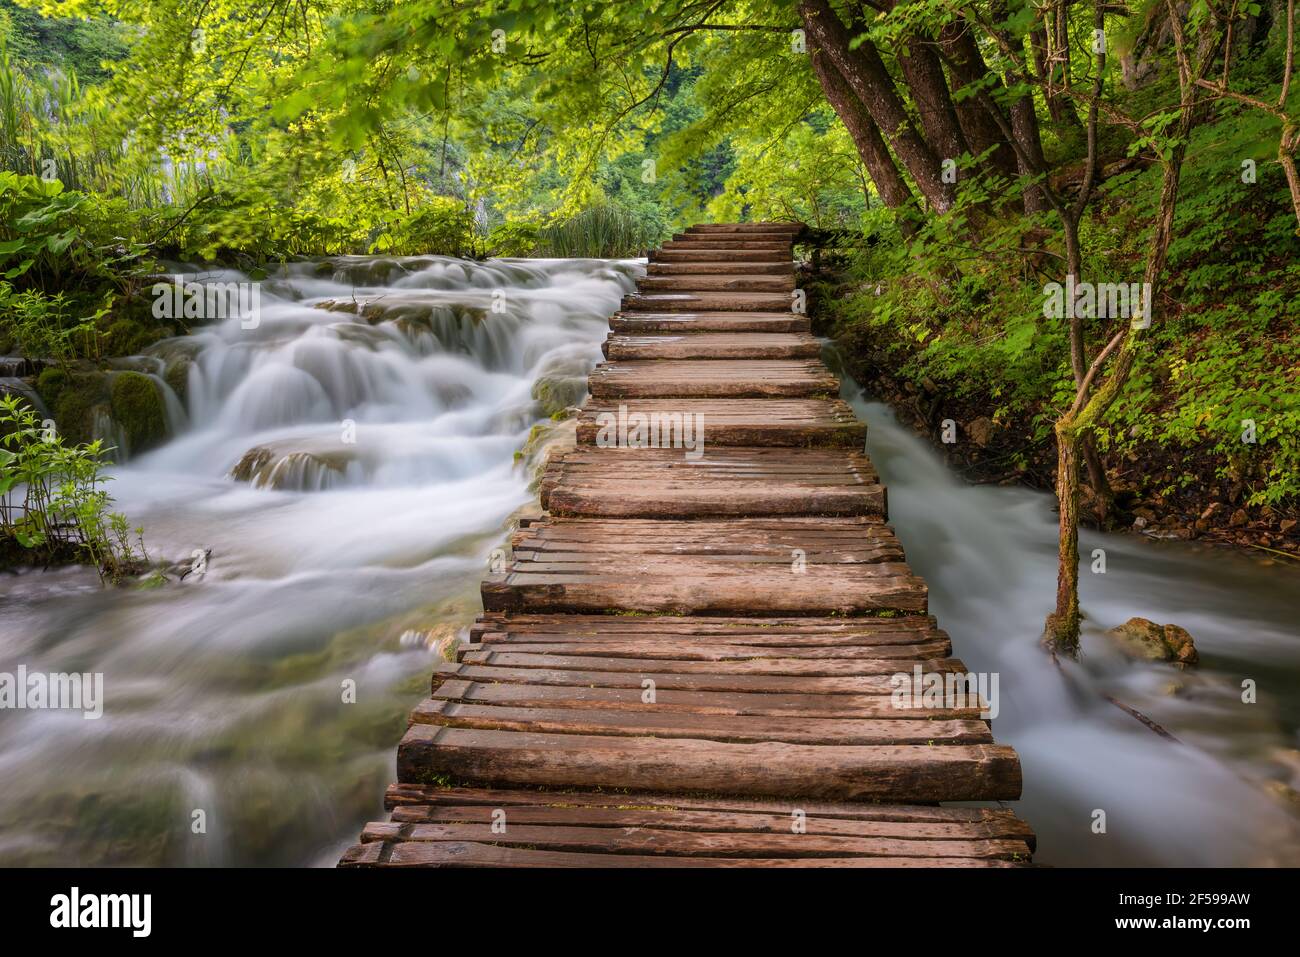 Beautiful view of waterfalls with turquoise water and wooden pathway through over water. Plitvice Lakes National Park, Croatia. Famous attraction Stock Photo